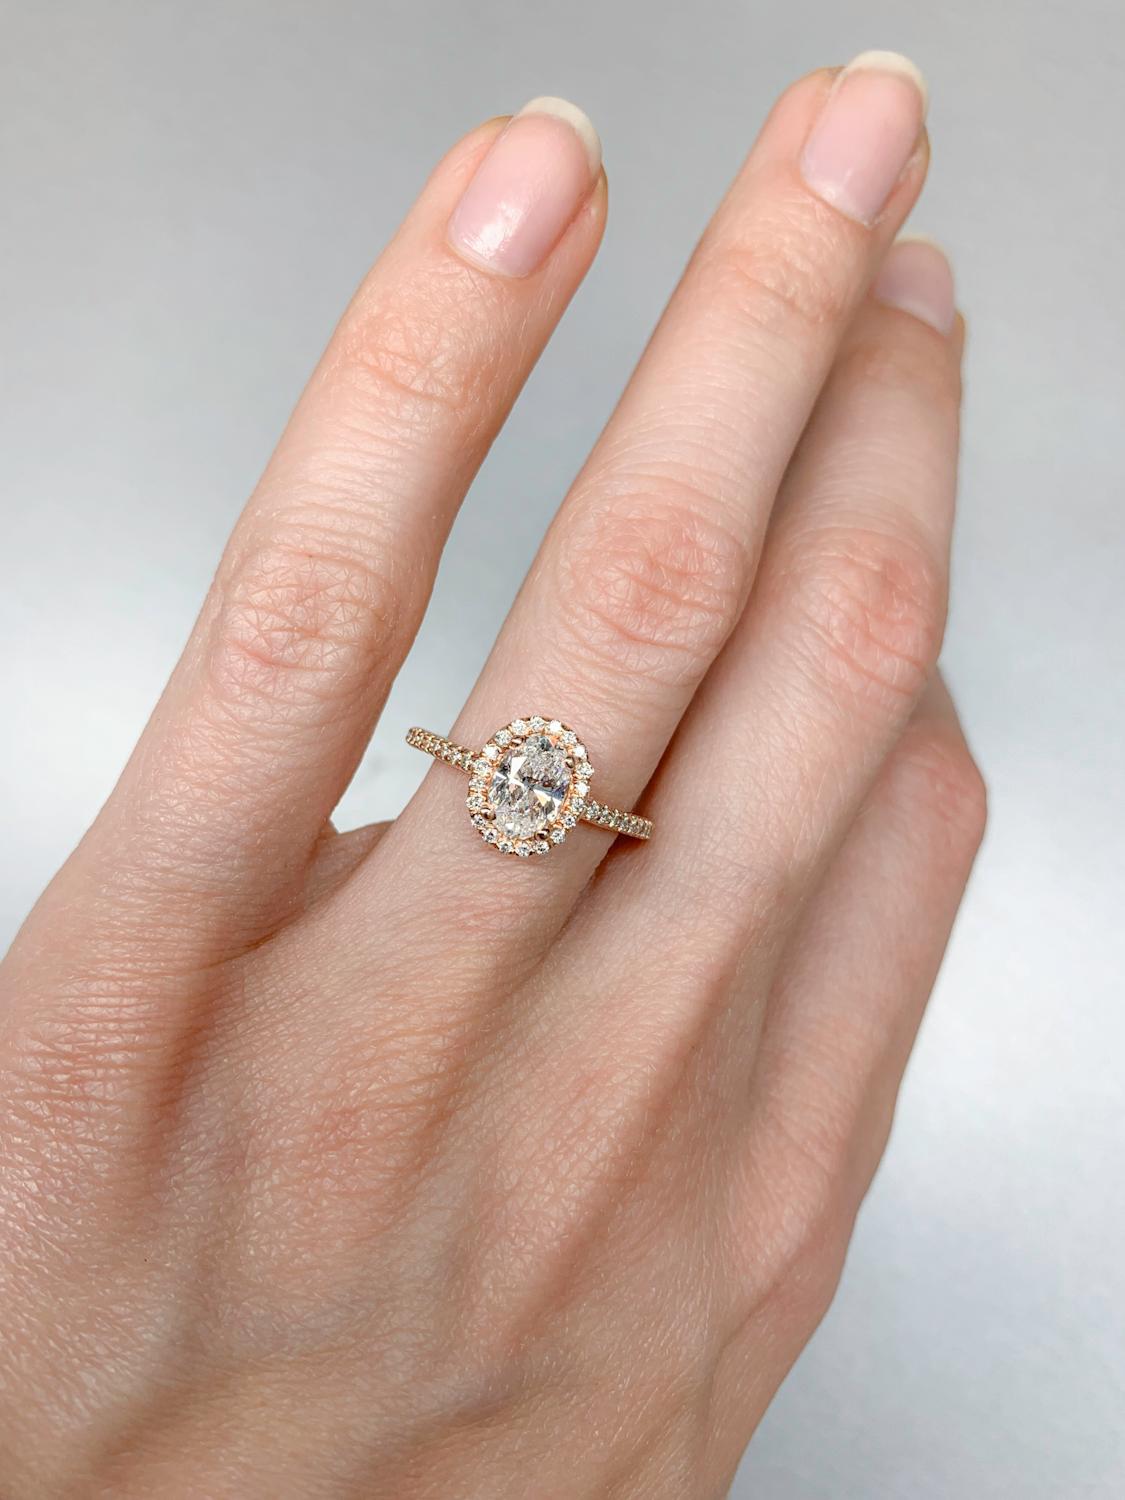 1.2 Carat Oval Diamond Halo Ring Set in Rose Gold For Sale 4